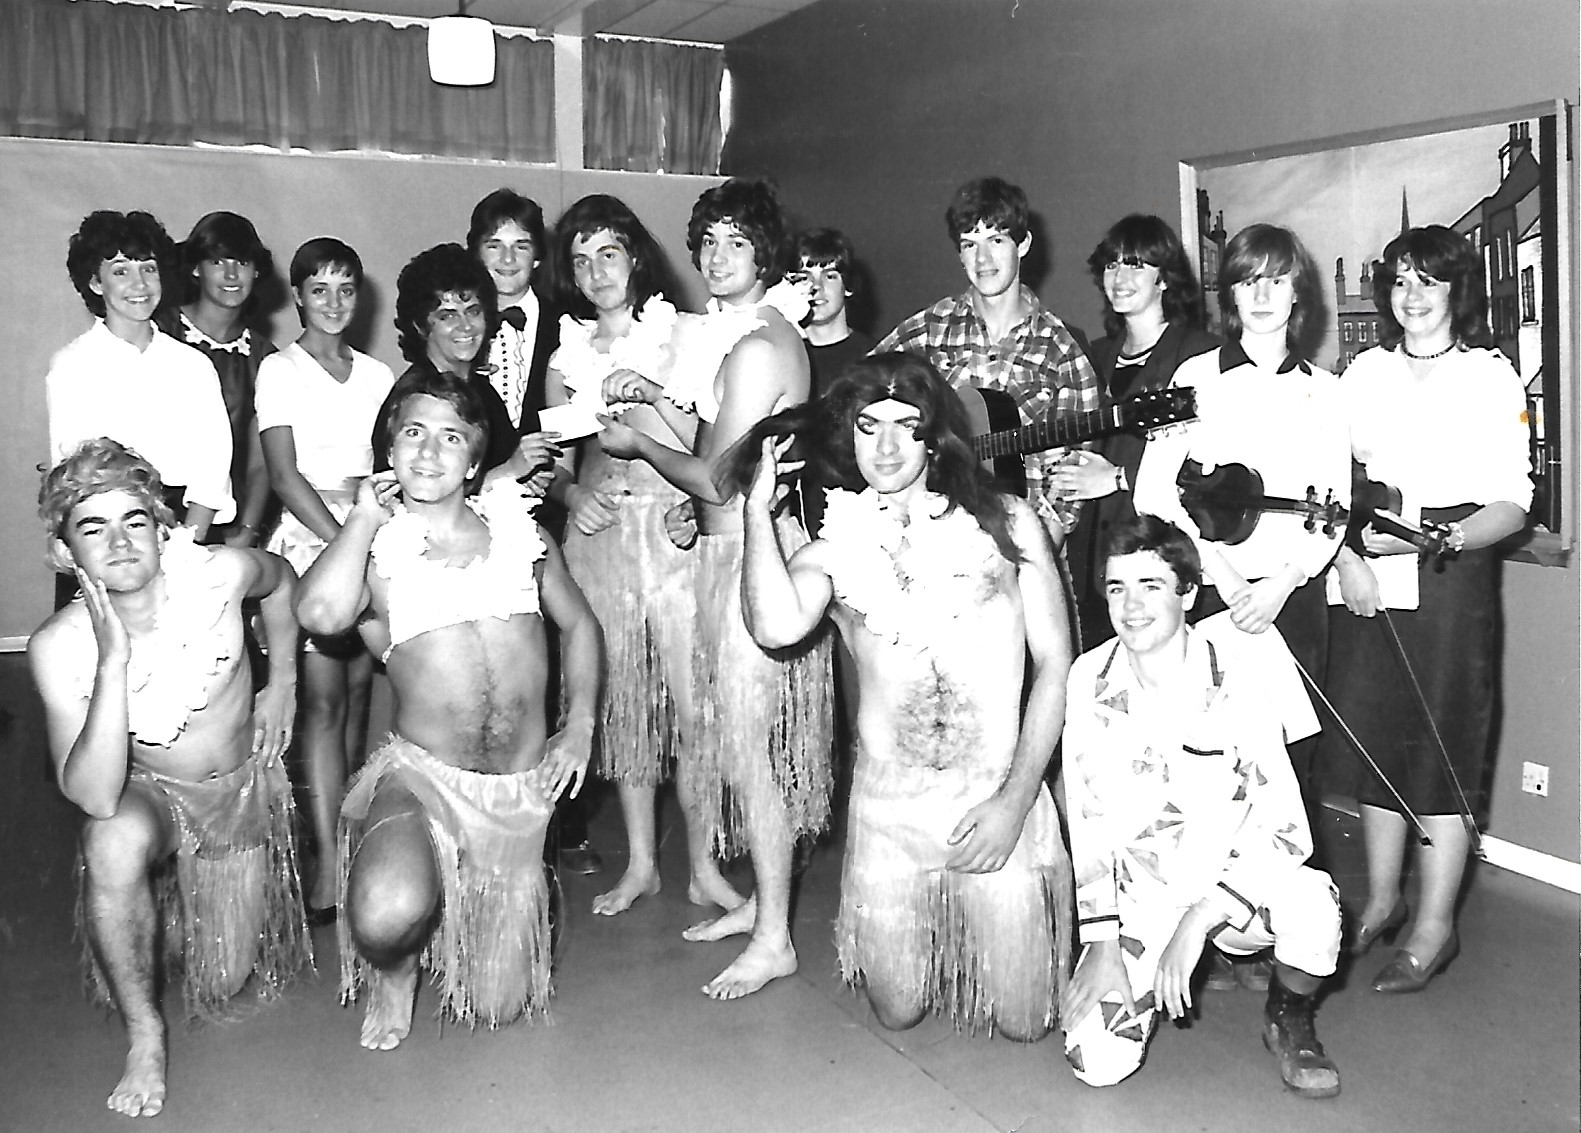 Southport did fancy dress in style back in the 1980s! These hula girls were part of a show at the Mornington Road Centre in September 1981